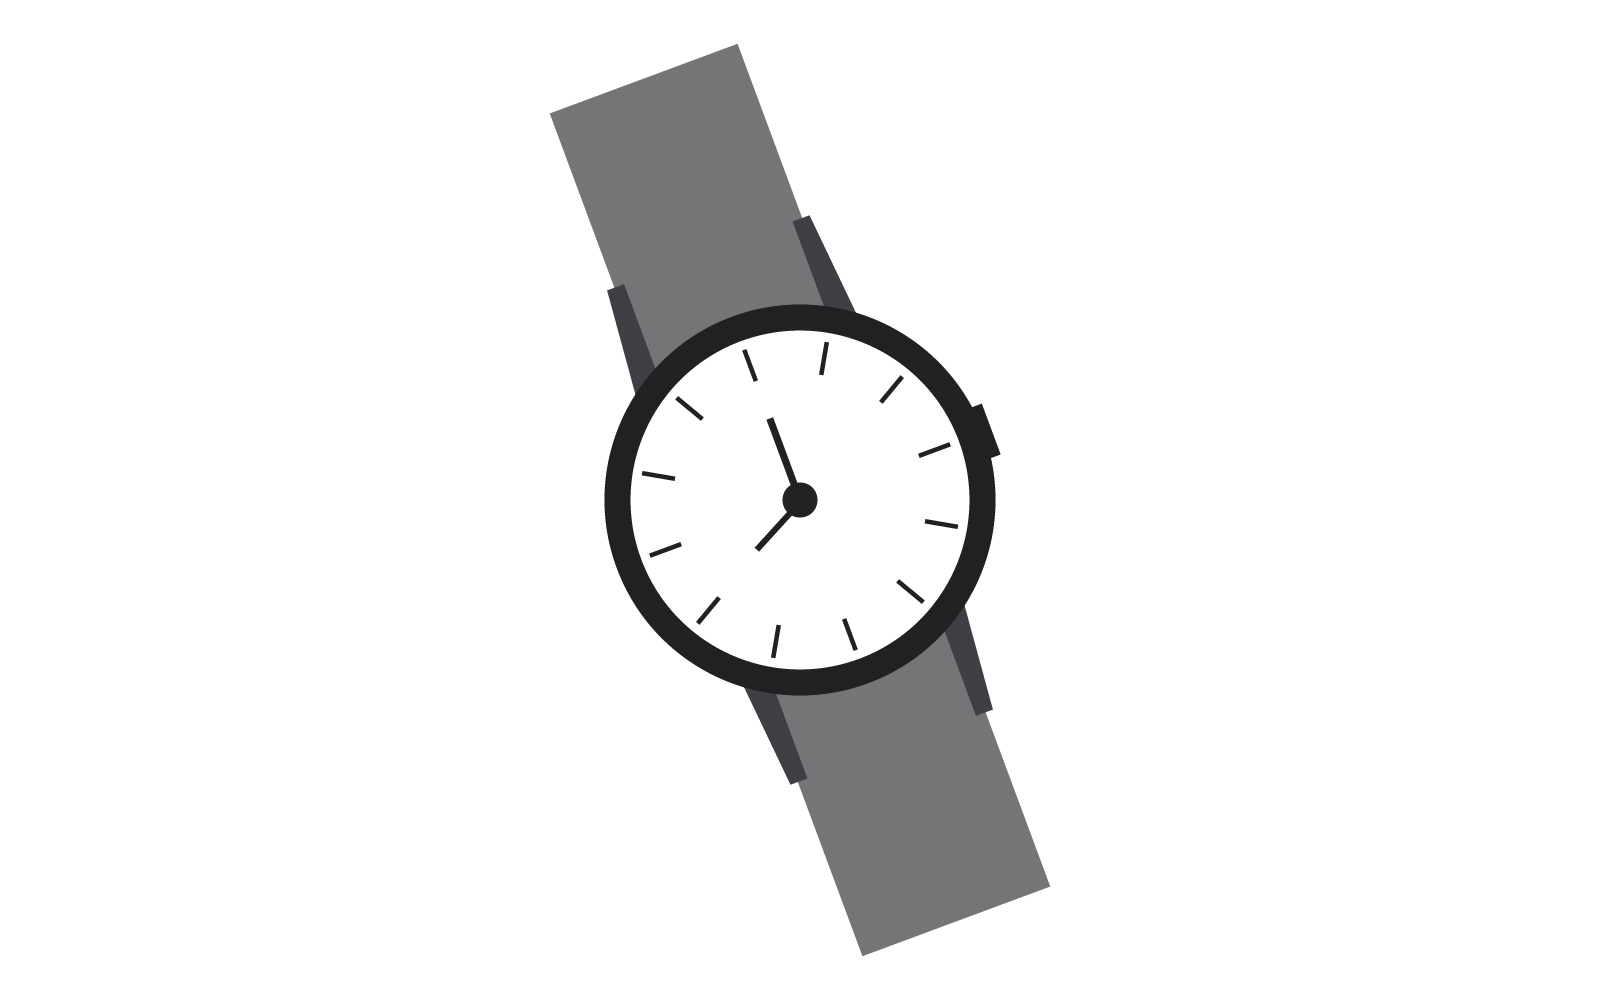 Wrist watch illustrated and colored in vector